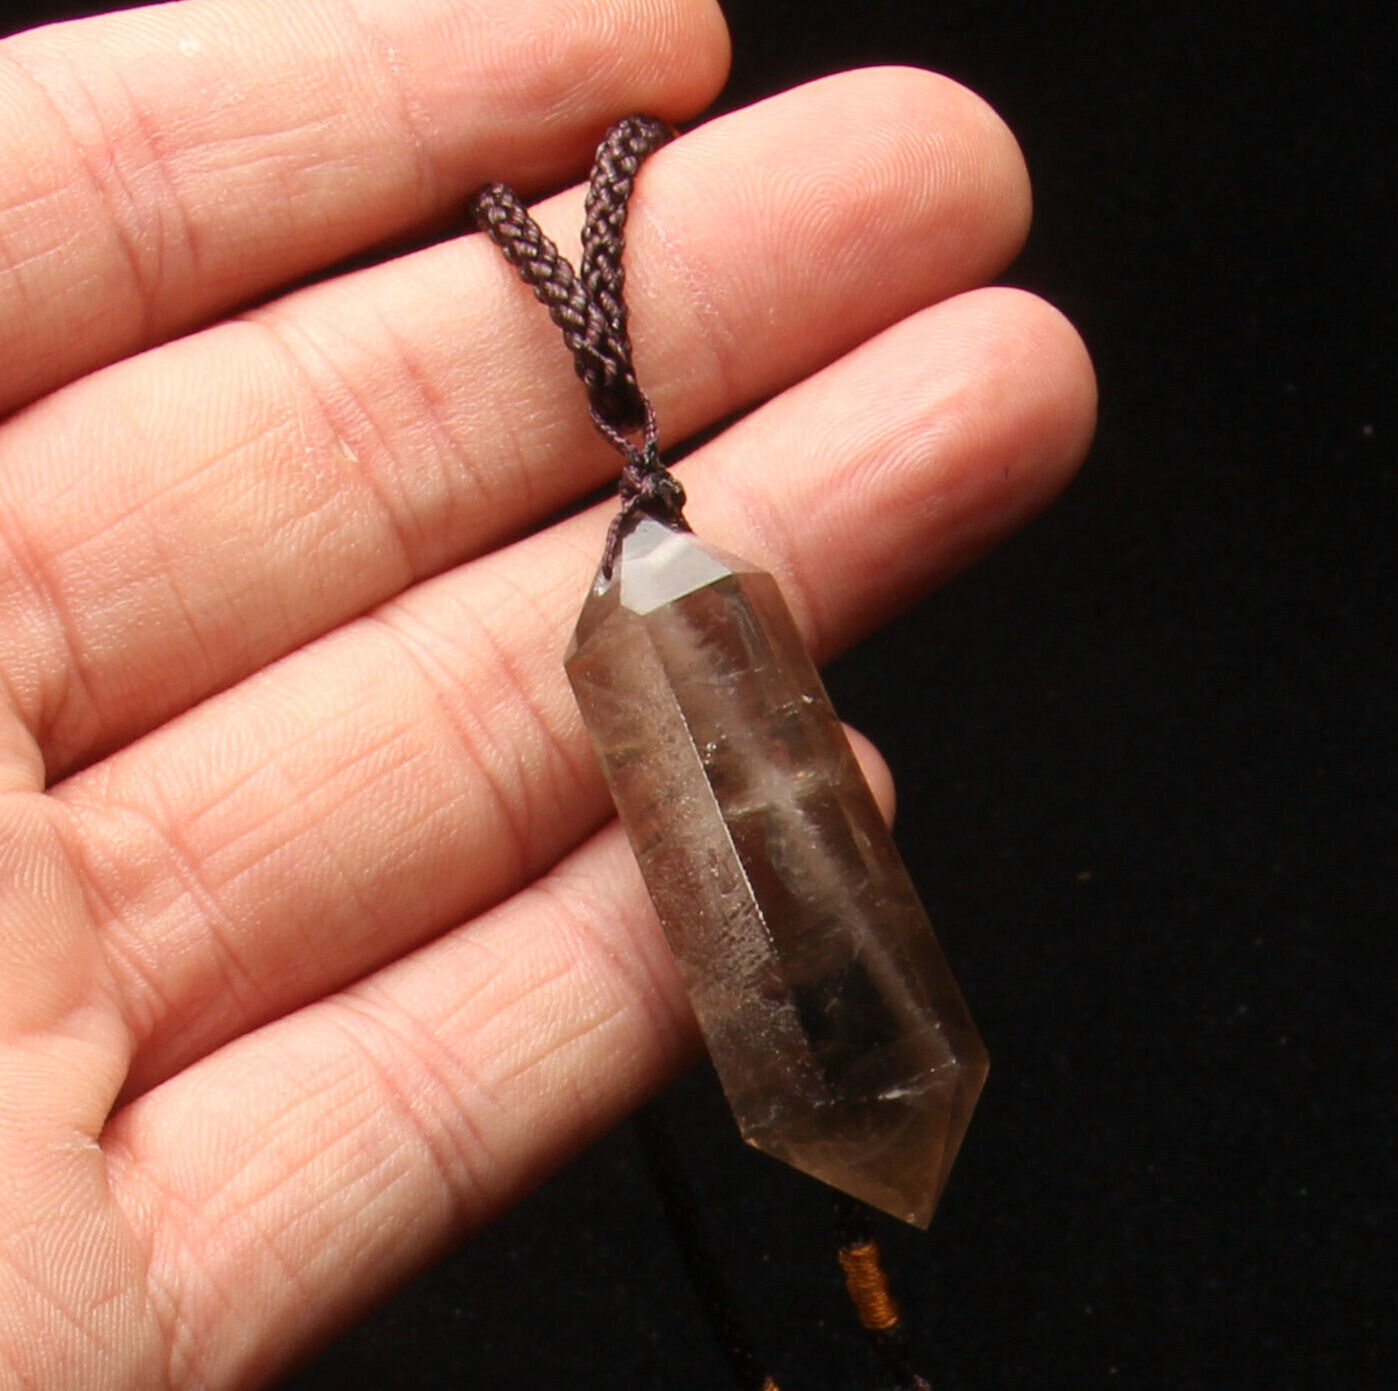 45mm Natural Mix material Double pointed pendant Crystal Quartz Healing Decorate